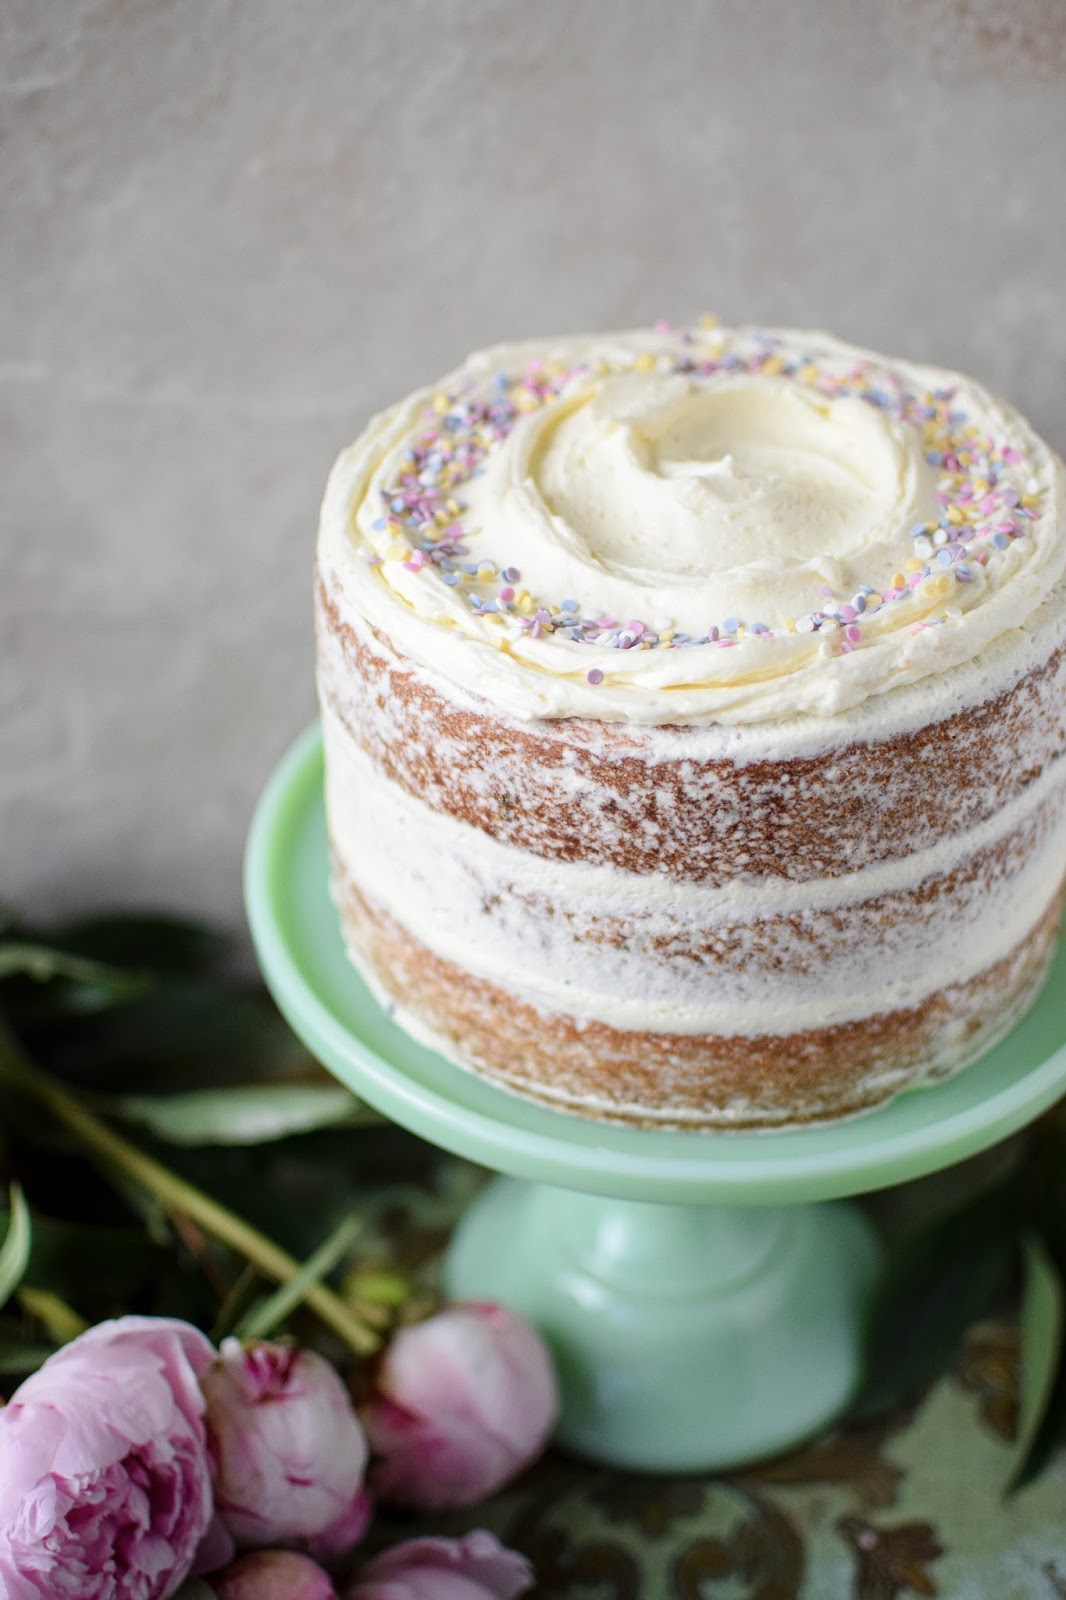 This super cute confetti cake will be the belle of any ball.